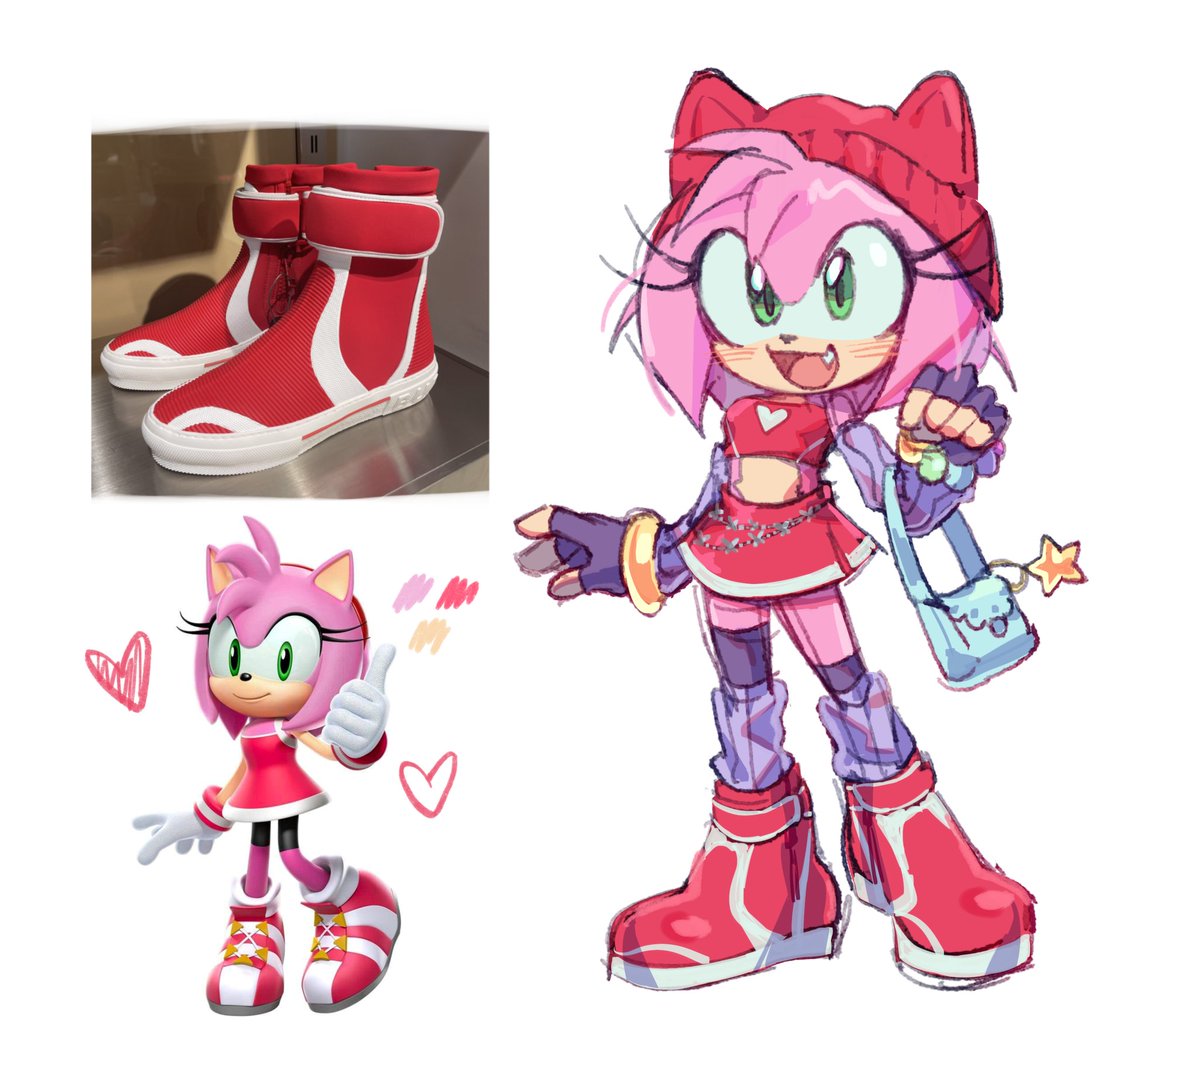 late AGAIN but I'm always on that Amy fashion agenda so here she is!

#amyrose #sonicthehedgehog